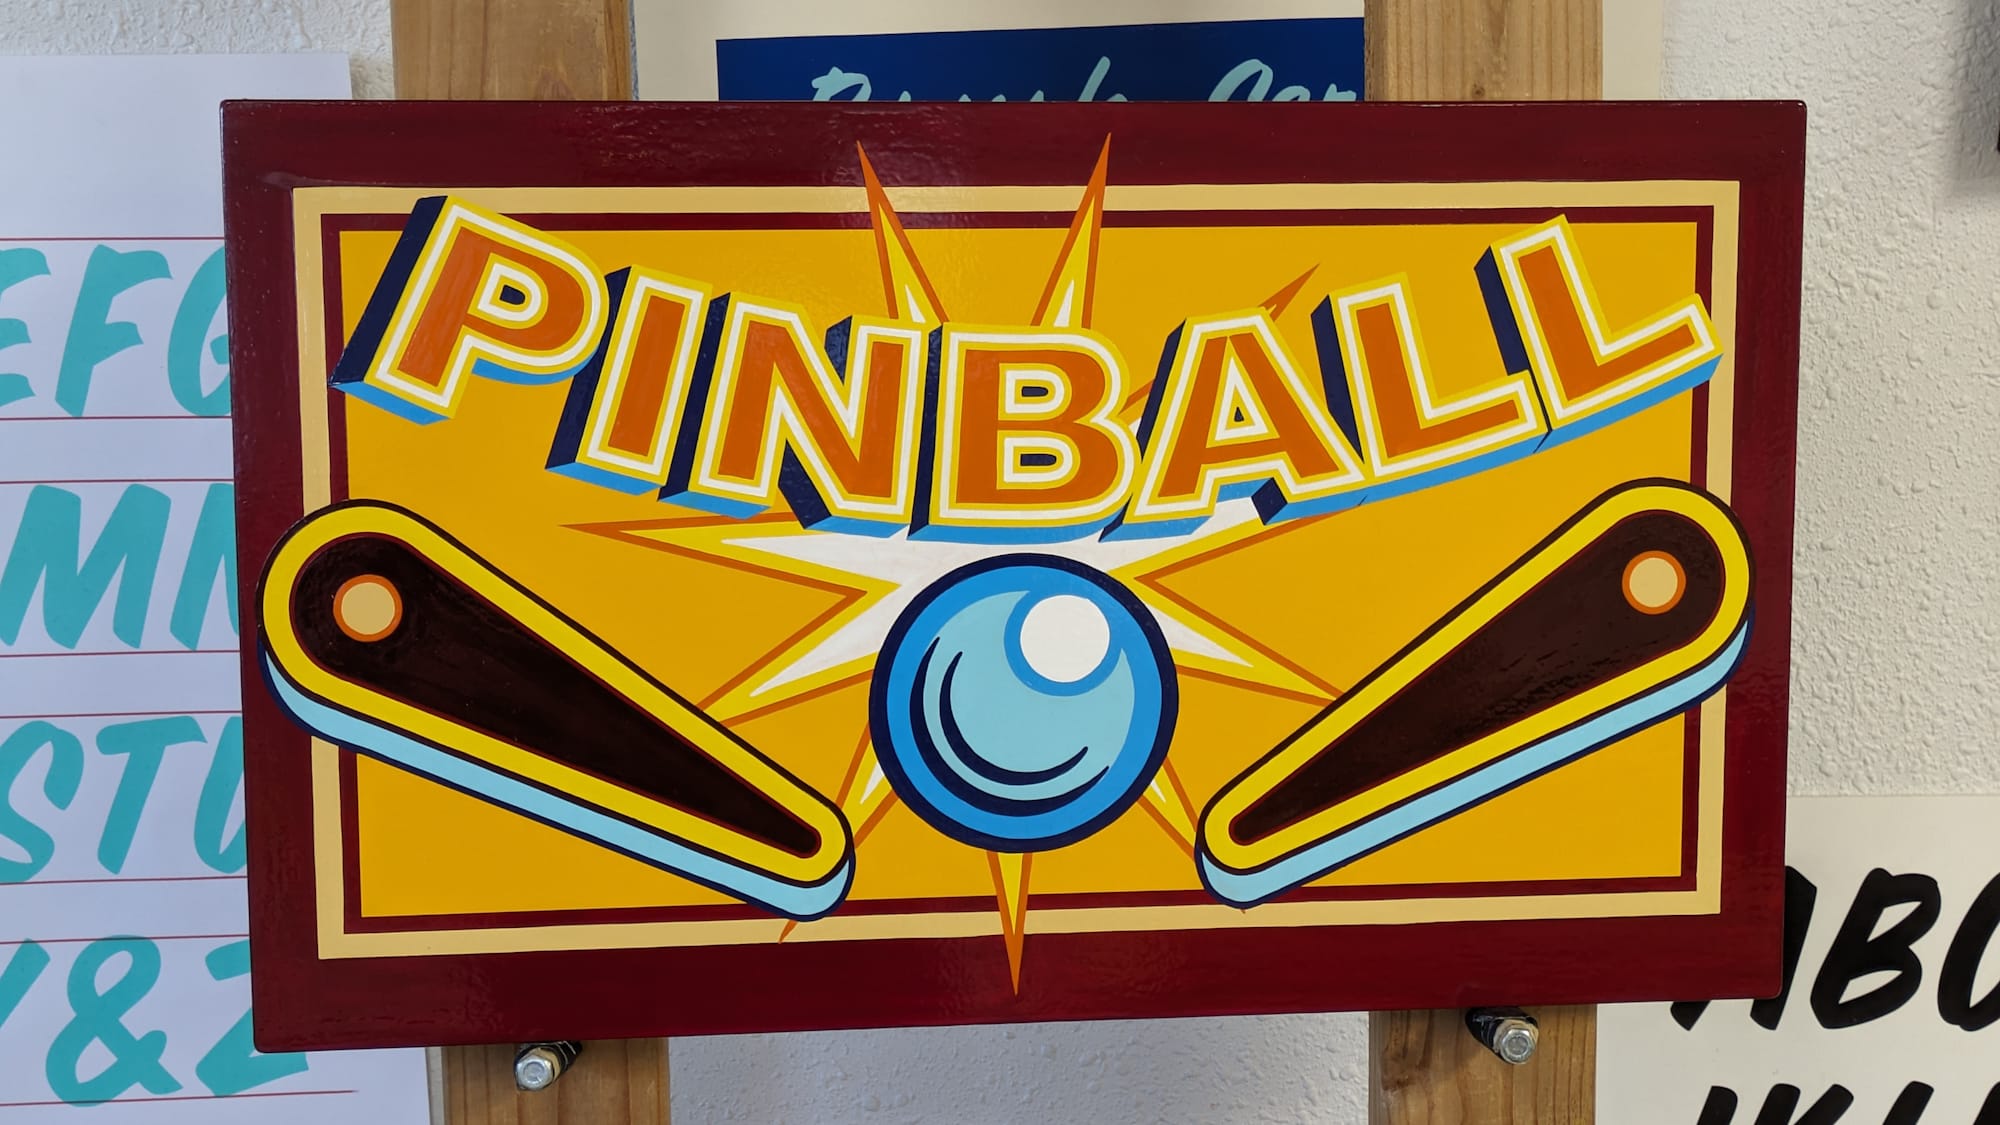 A hand-painted sign on an easel with the word 'pinball' and an illustration of the ball and two flippers.